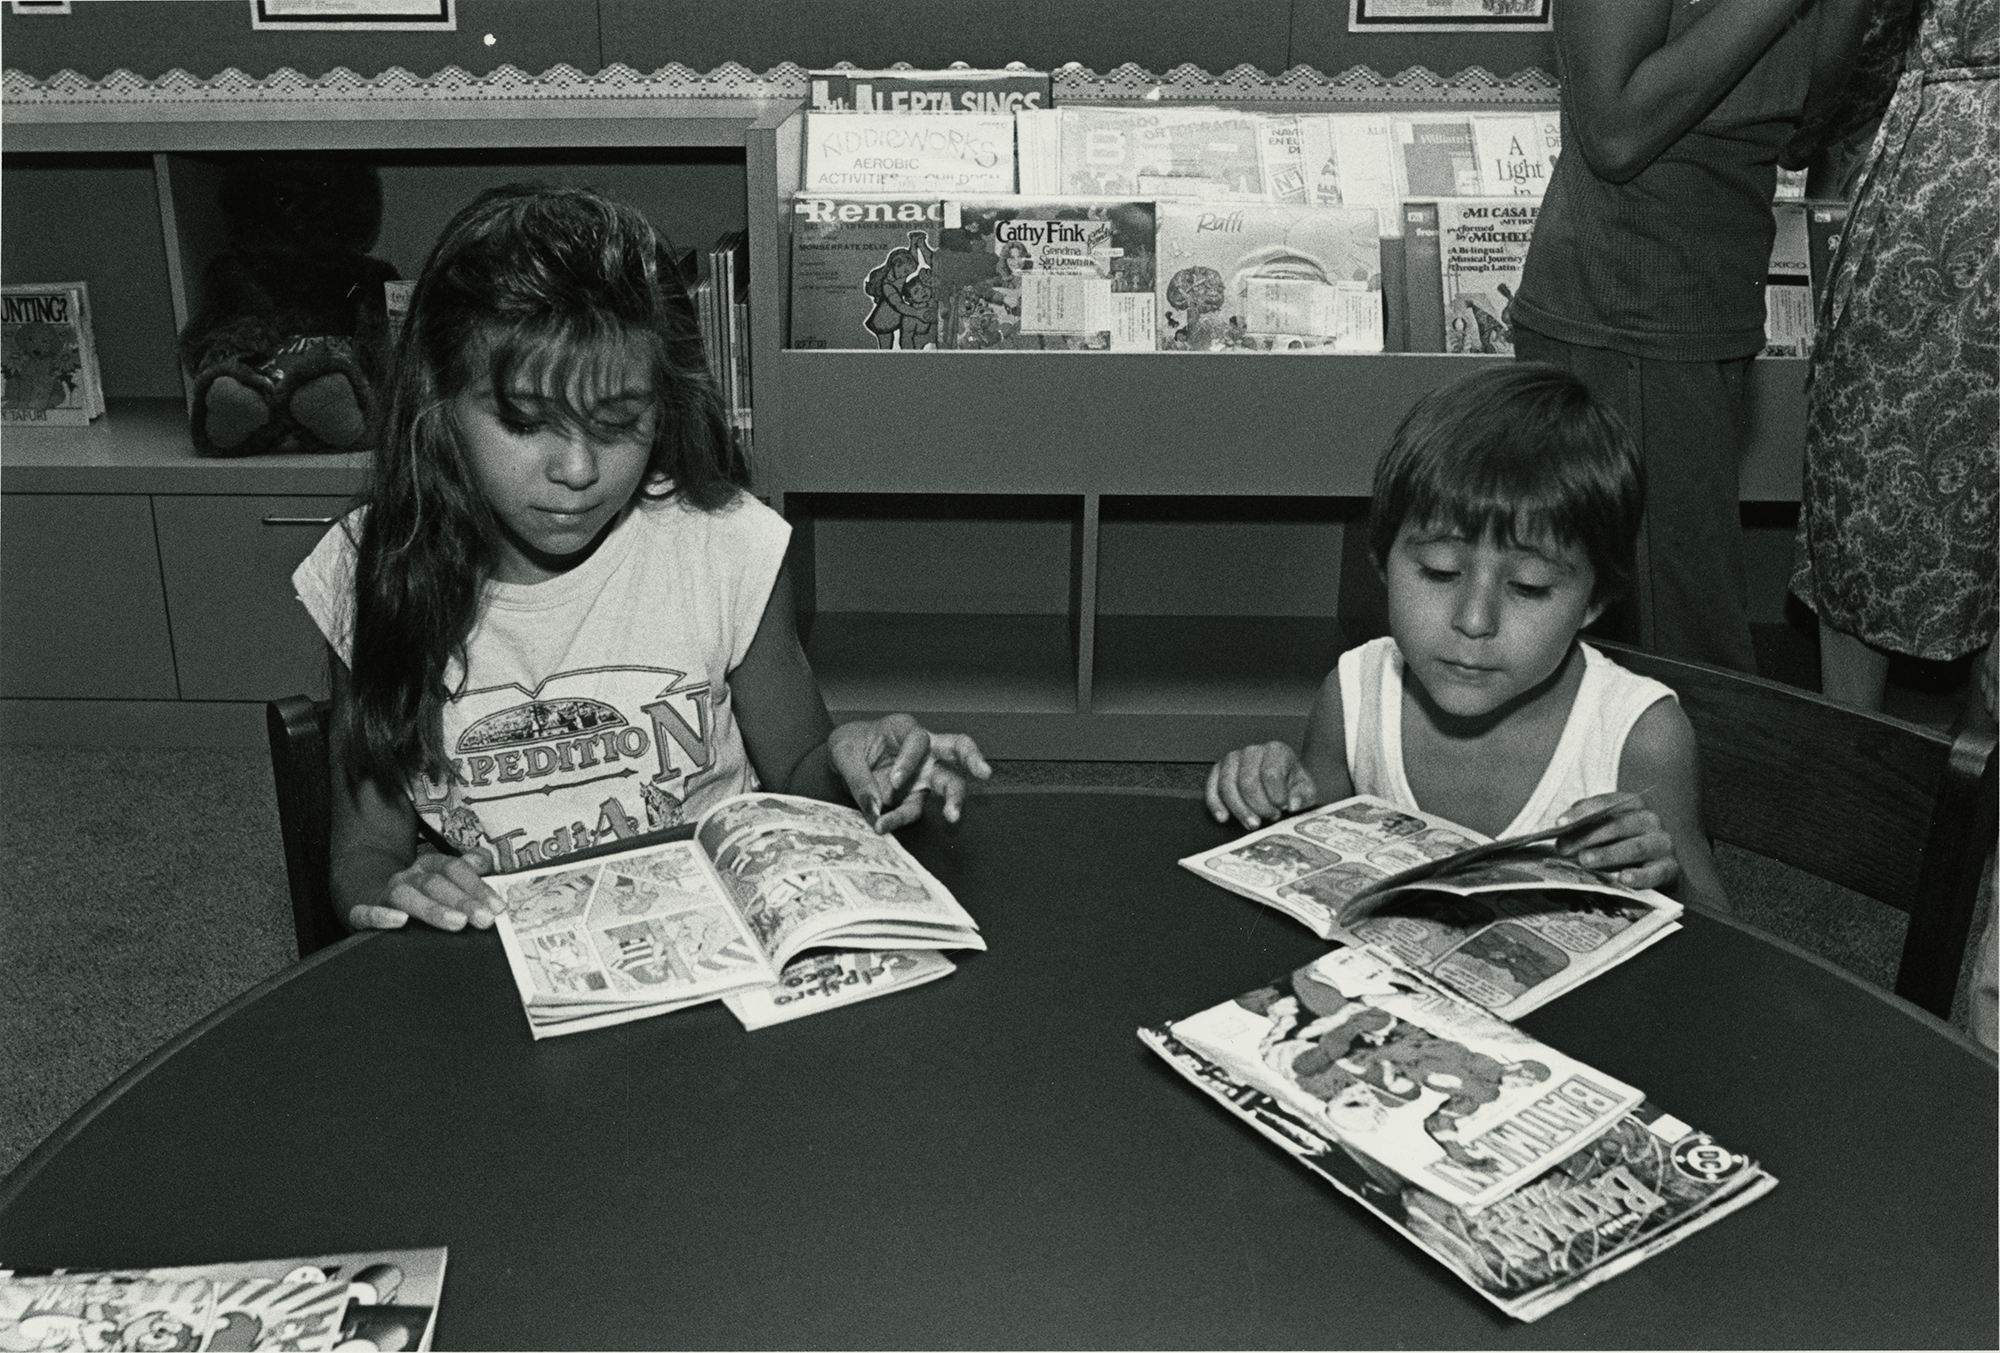 1989, children at the opening of Lozano Branch.